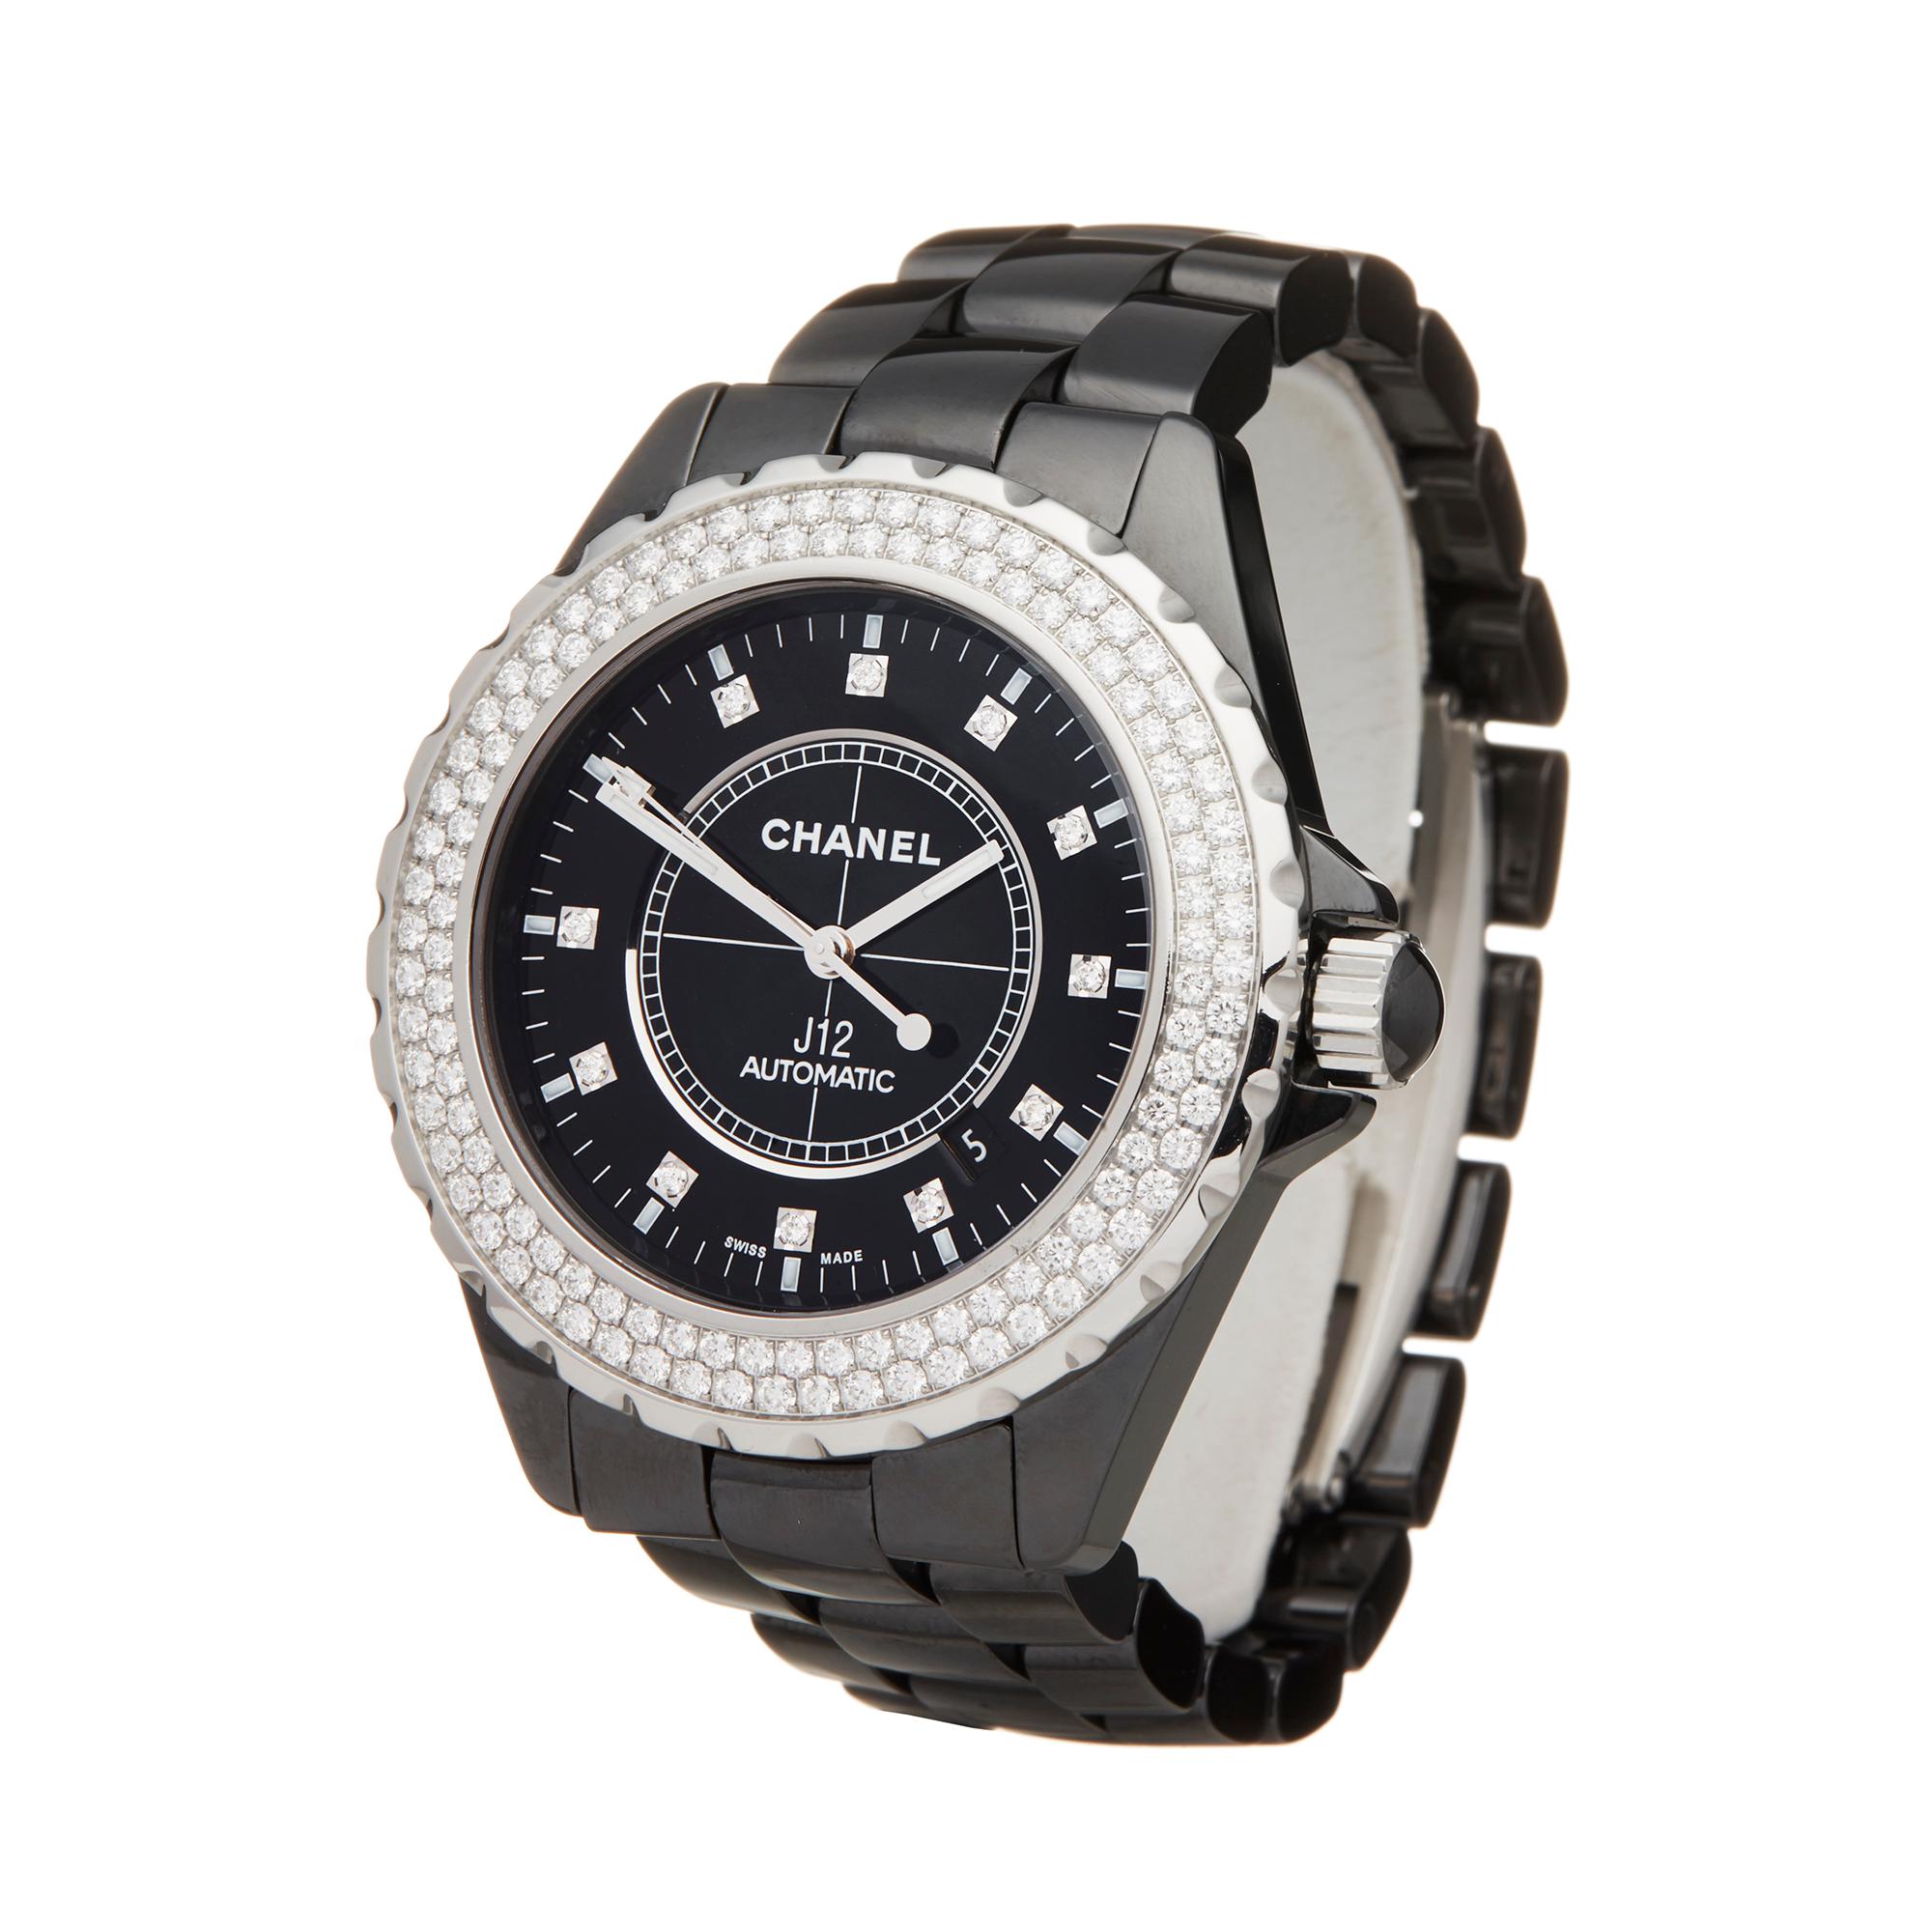 Reference: W6064
Manufacturer: Chanel
Model: J12
Model Reference: H2014
Age: Circa 2010's
Gender: Women's
Box and Papers: Box & Open Guarantee
Dial: Black Diamond
Glass: Sapphire Crystal
Movement: Automatic
Water Resistance: To Manufacturers